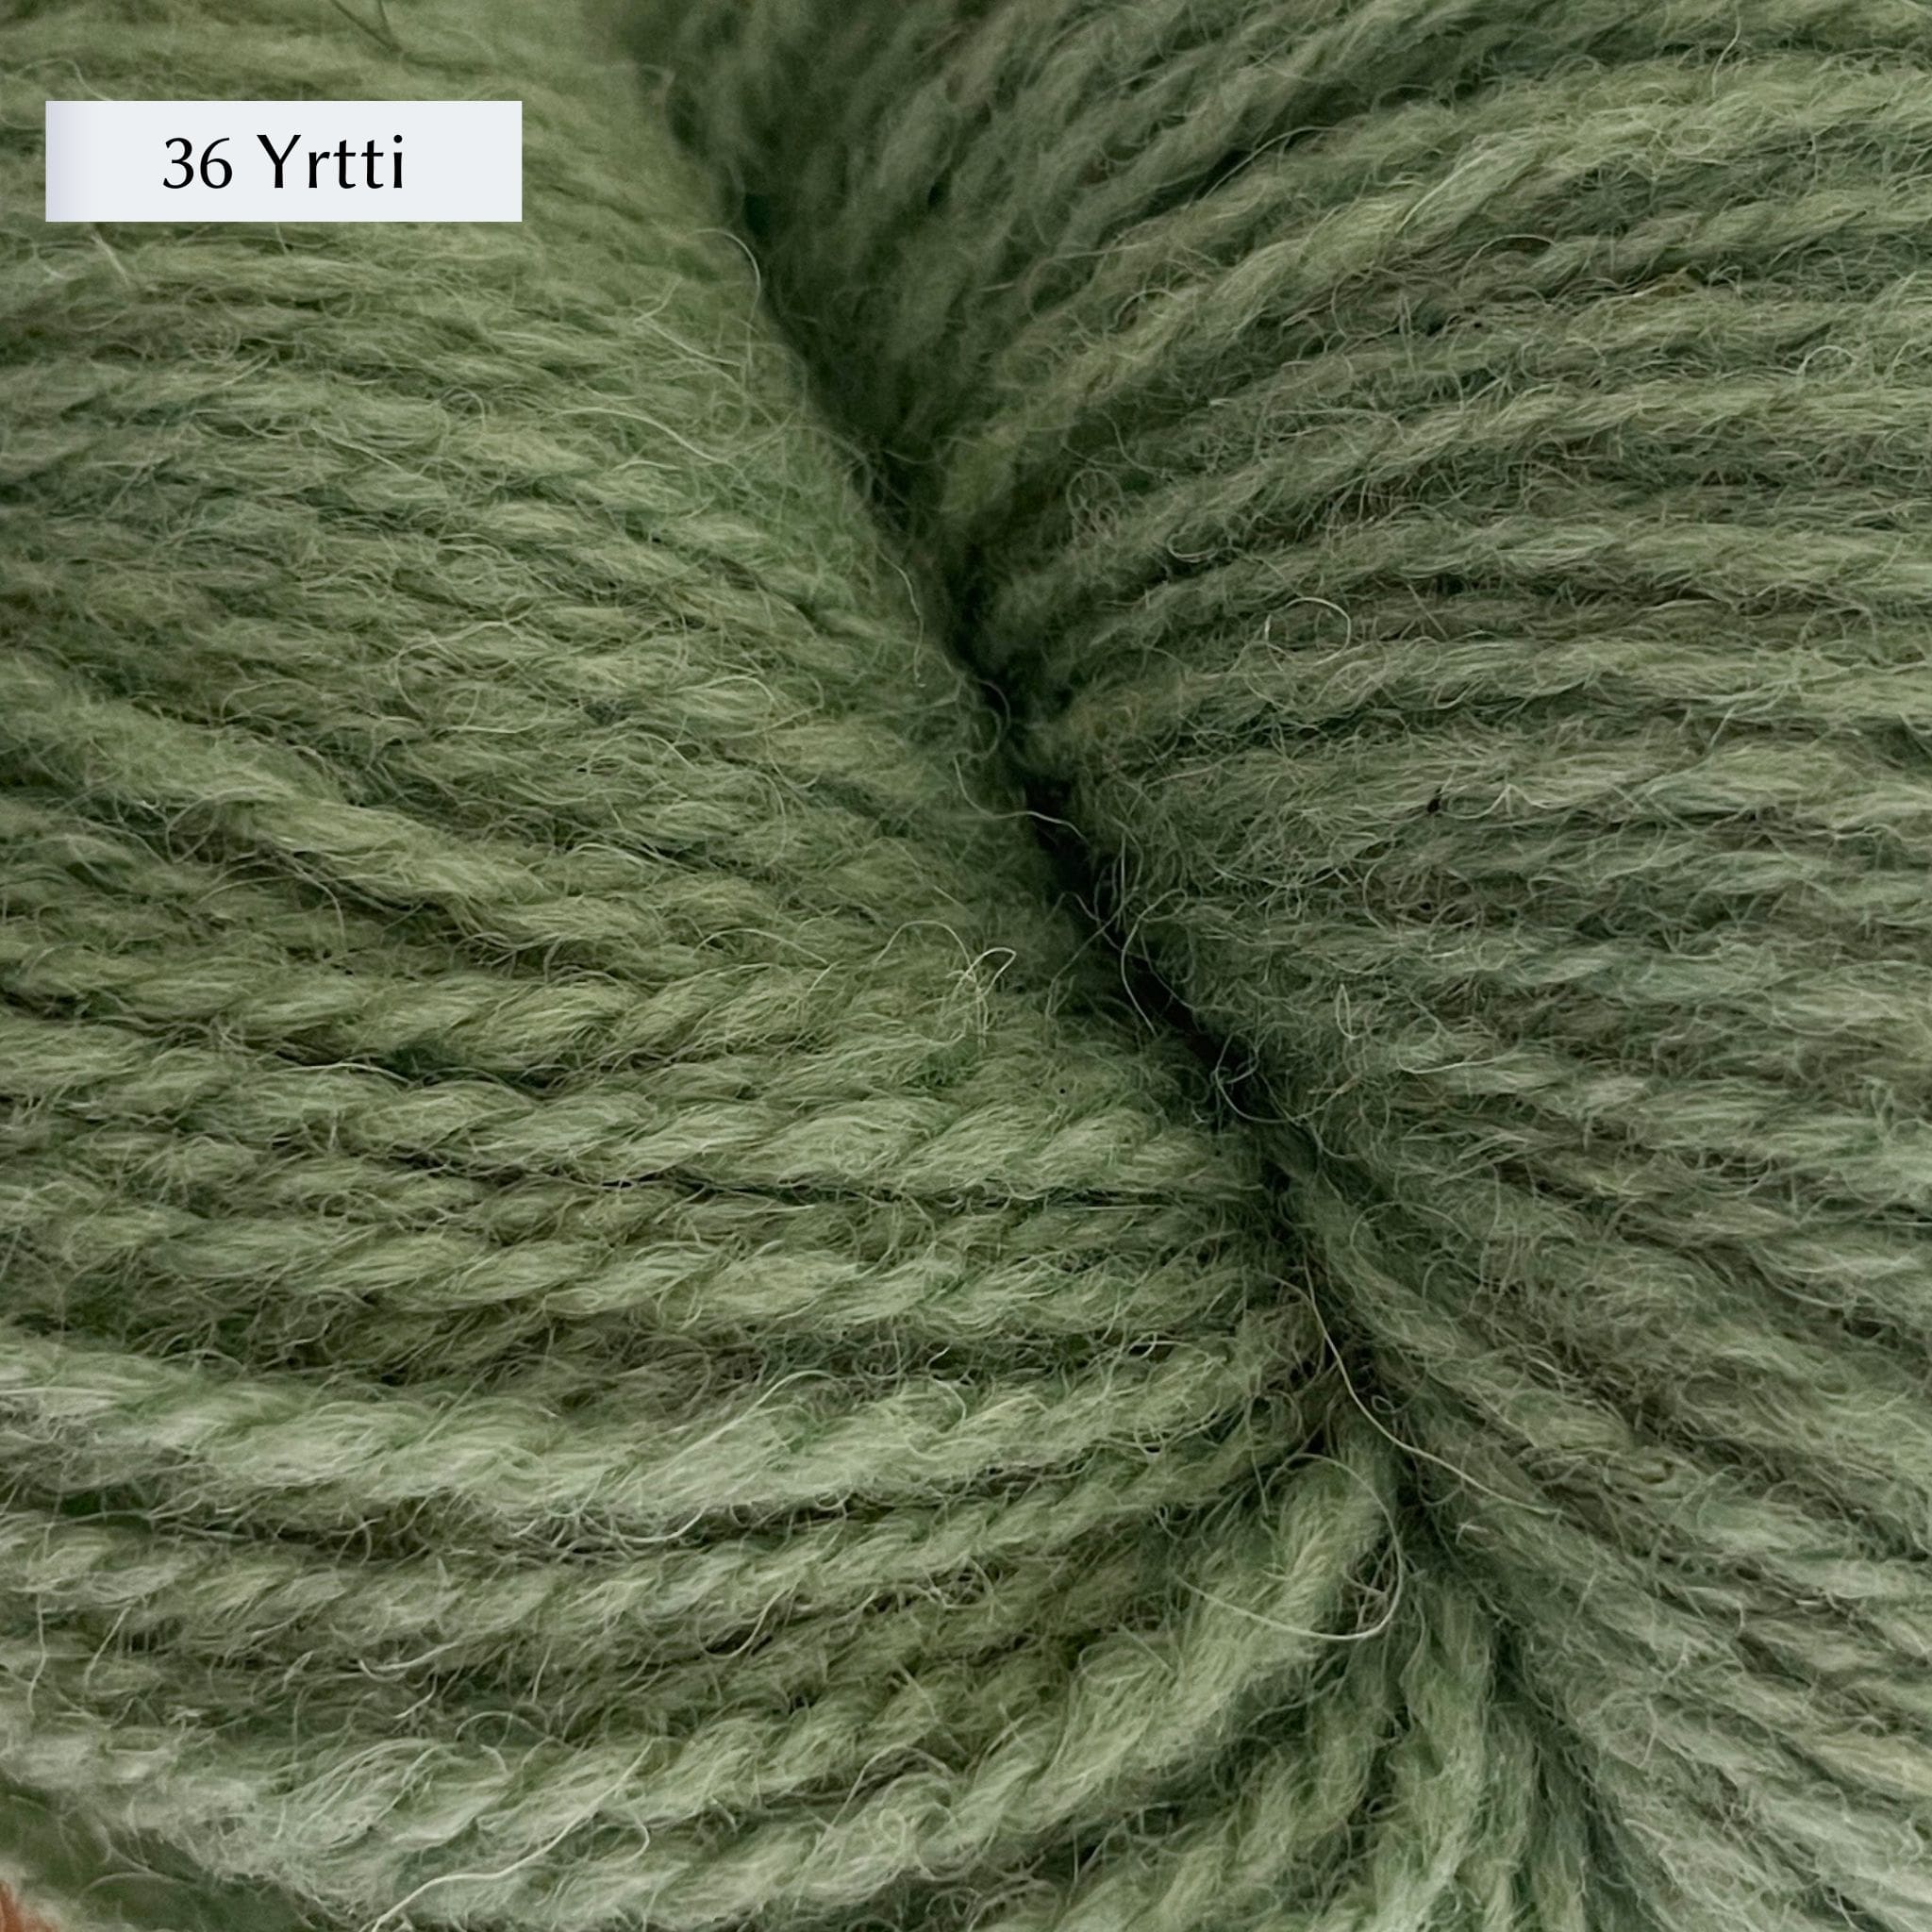 Tukuwool DK Yarn, 100% Finnish Wool shown in colorway  36 Yrtti which is a muted light green color. 